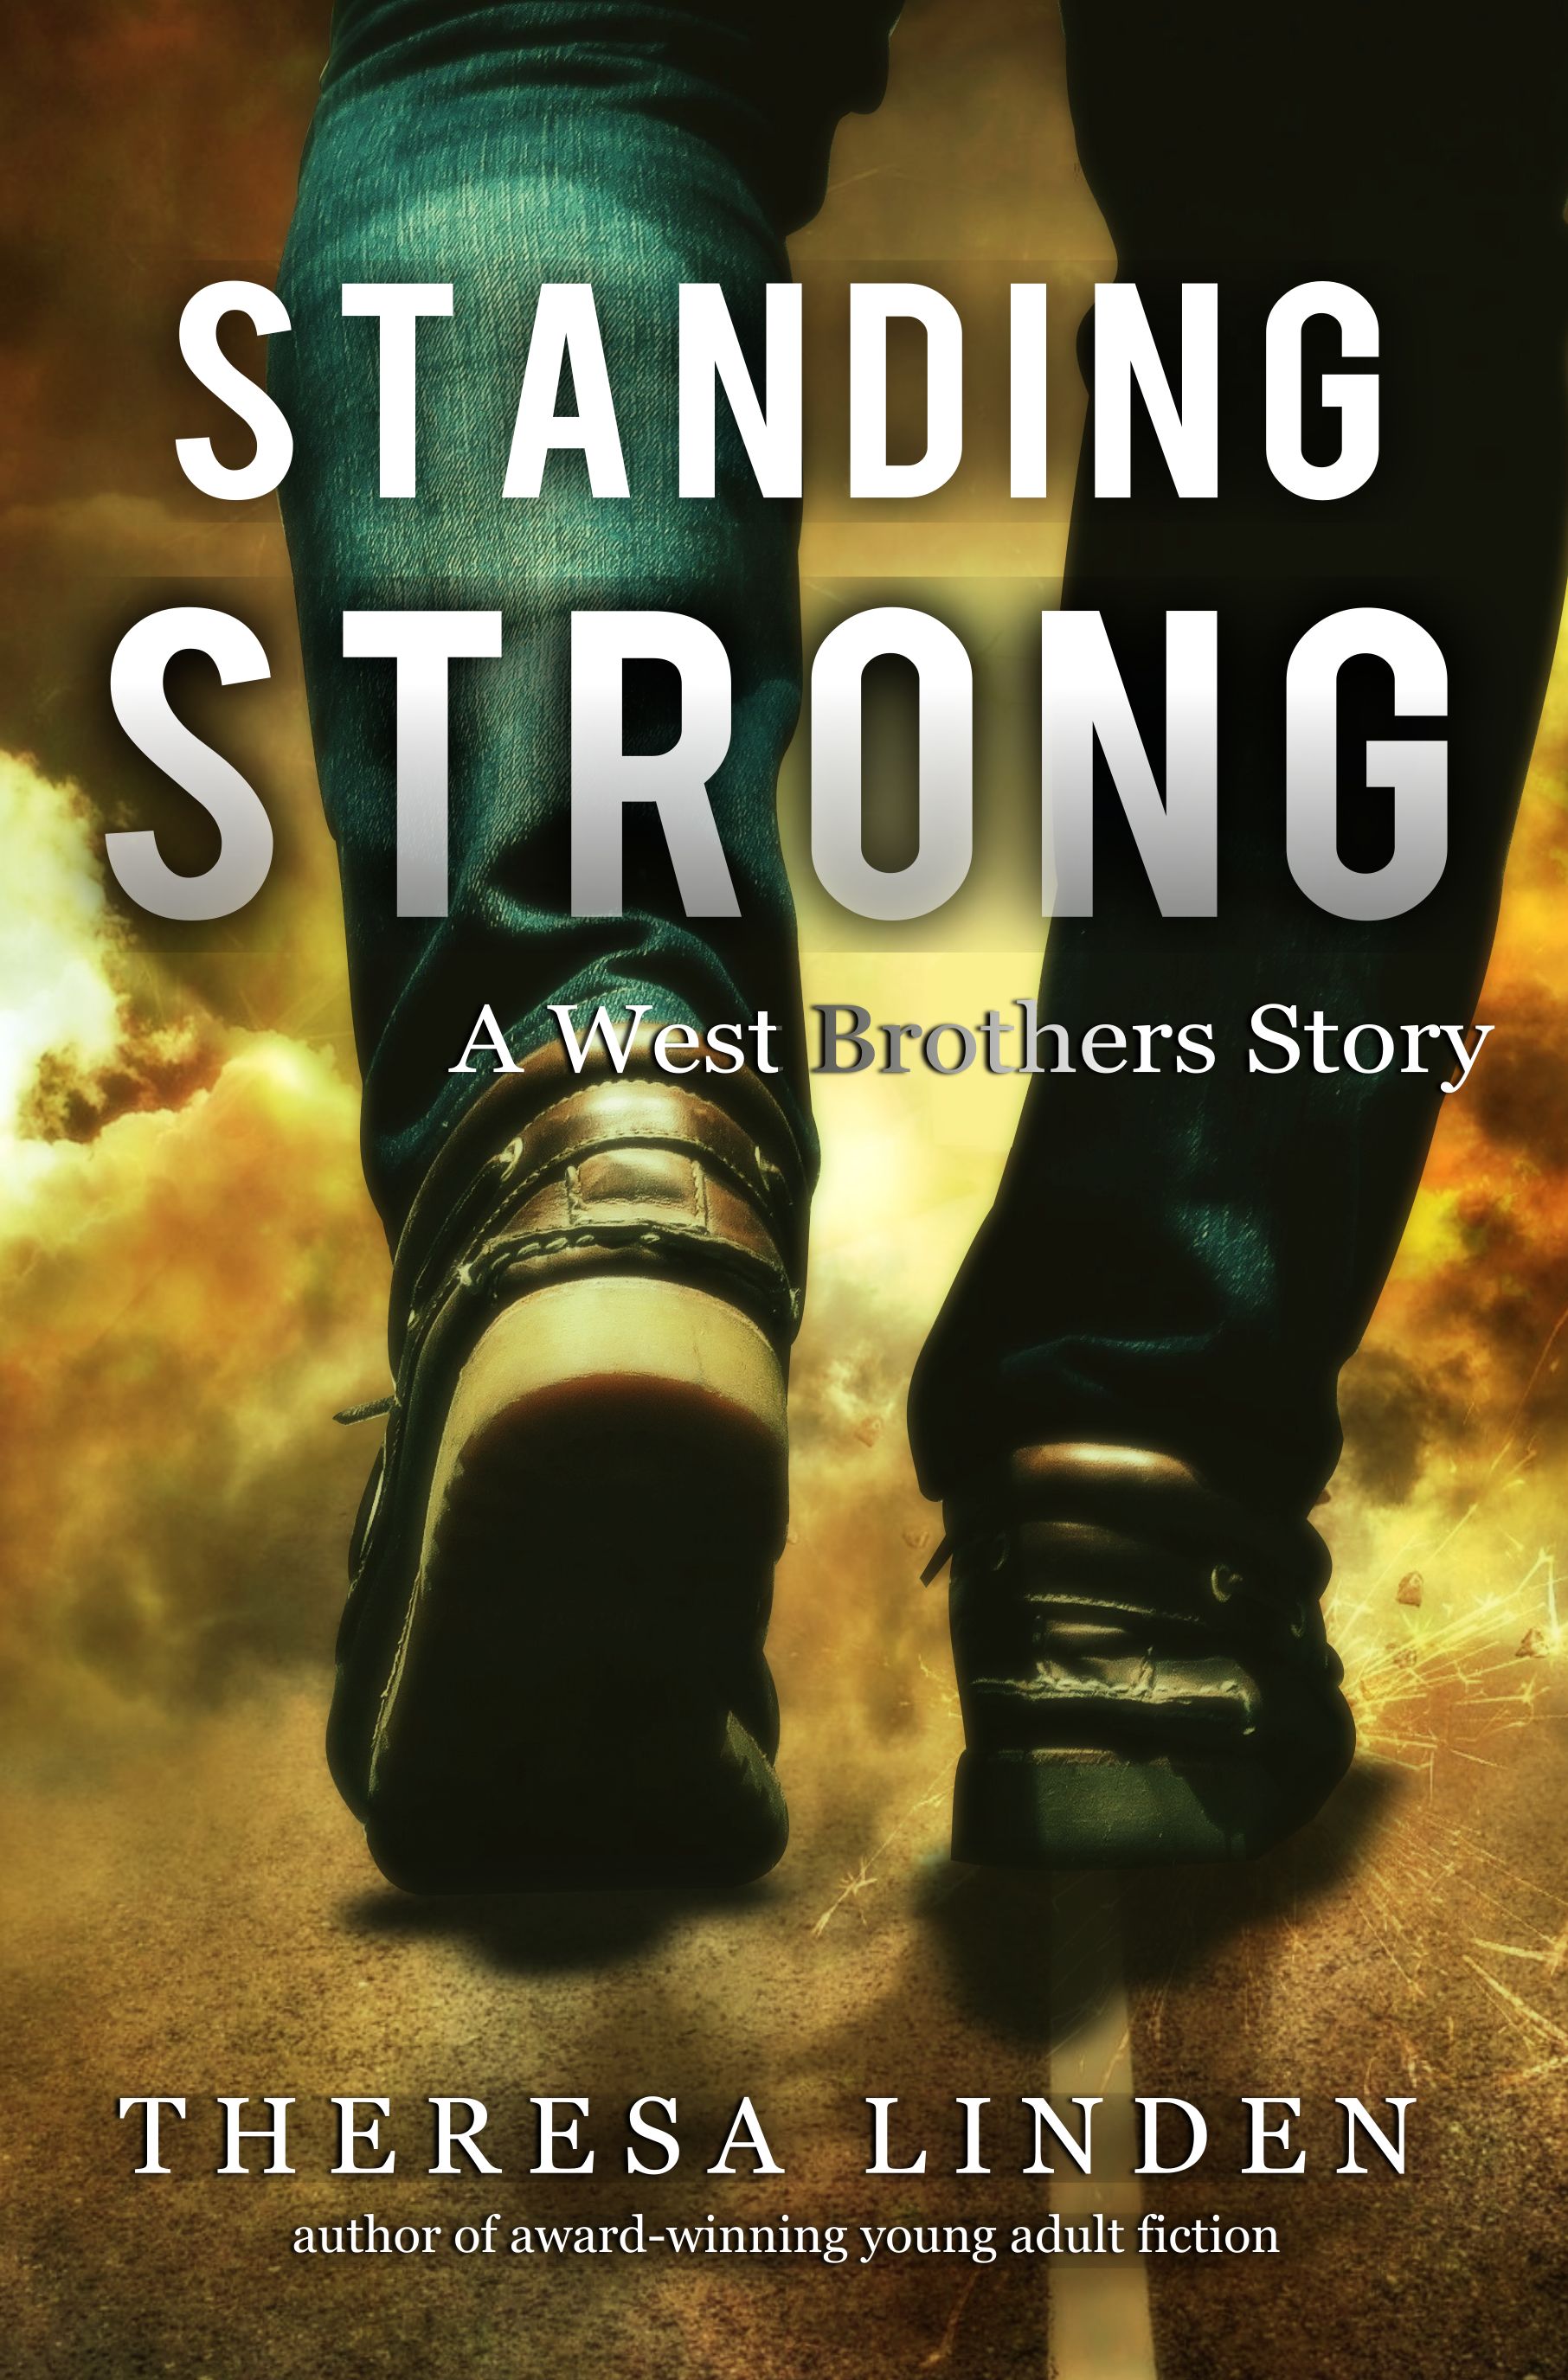 Stand strong. Westerlies brother. W brothers. Teresa strong Wilson's Touchstone stories.